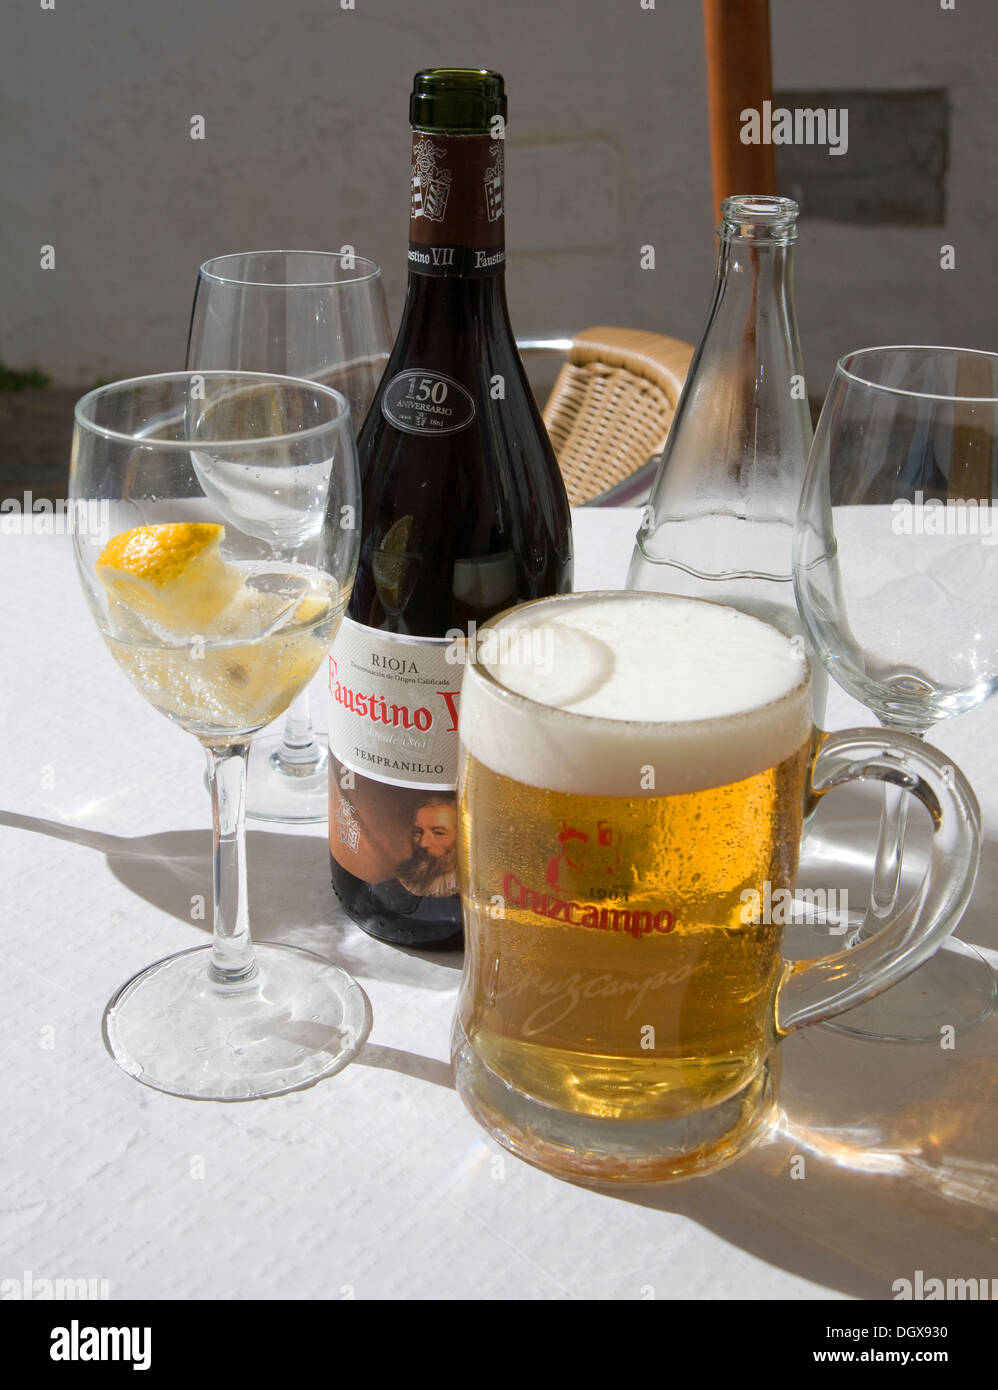 Large glass Cruzcampo beer Spain with glasses of water and  bottle red wine on table Stock Photo